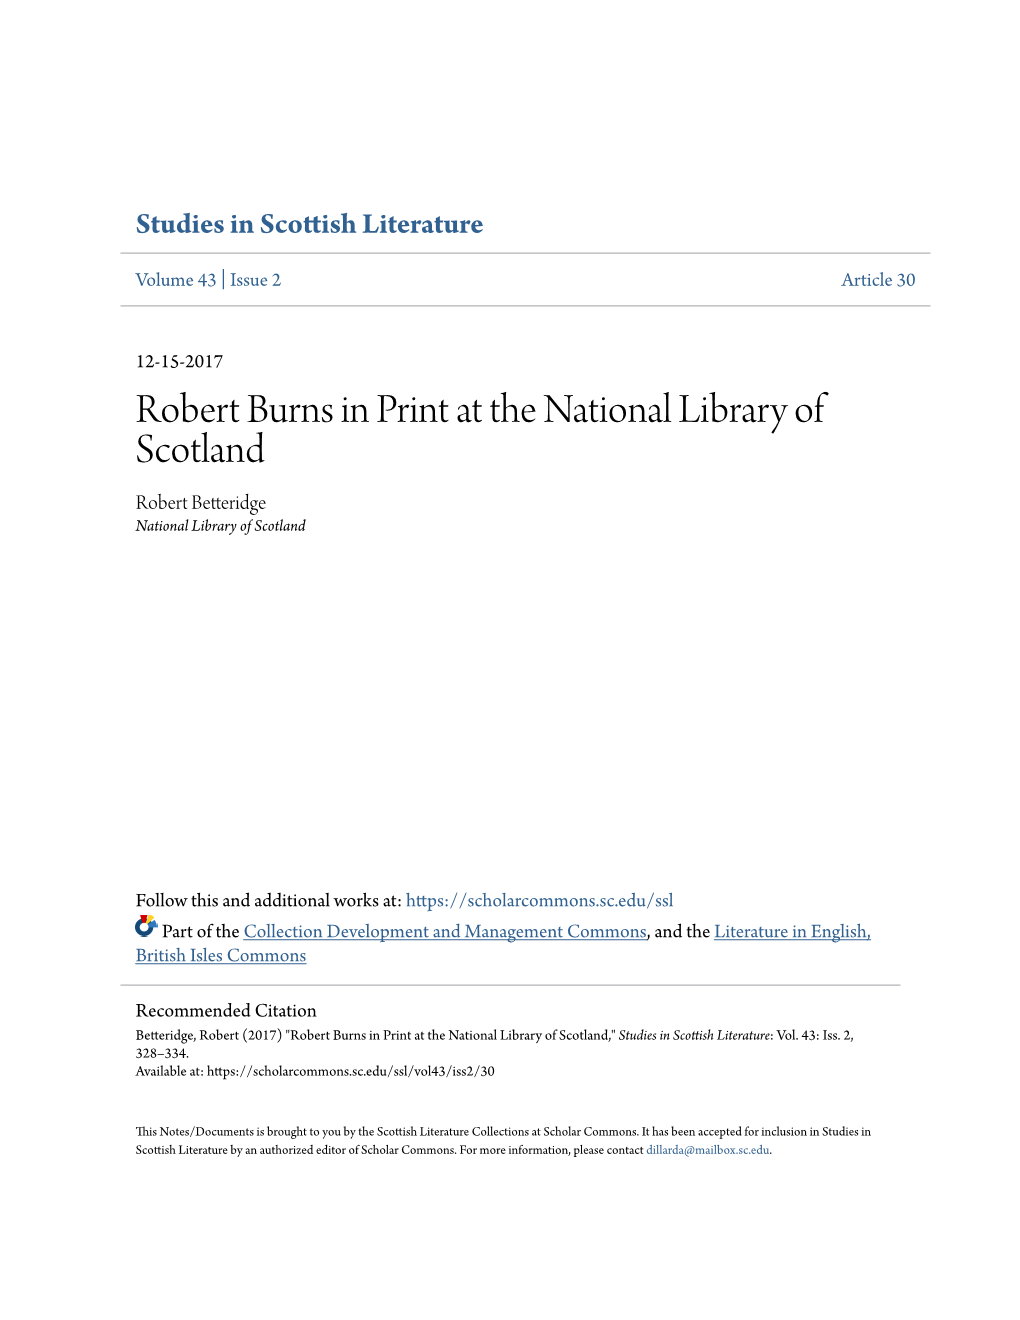 Robert Burns in Print at the National Library of Scotland Robert Betteridge National Library of Scotland